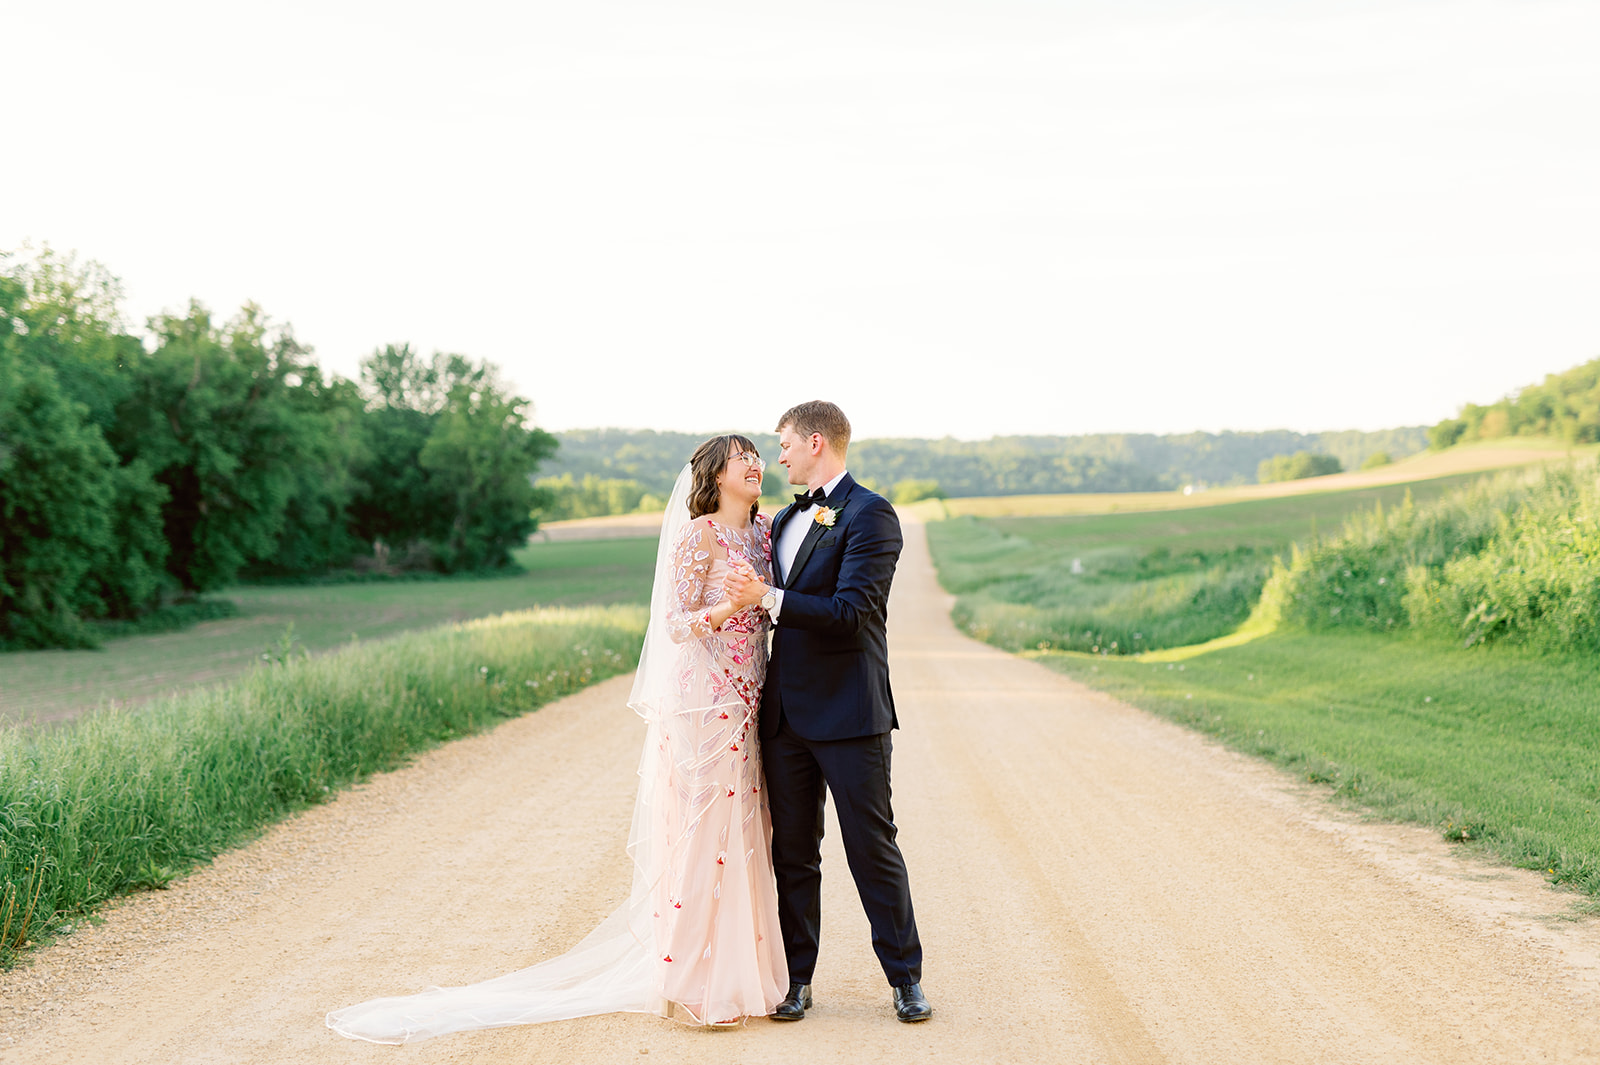 Newlyweds dance in a dirt road on a farm at a Unique Wedding Venues Minnesota